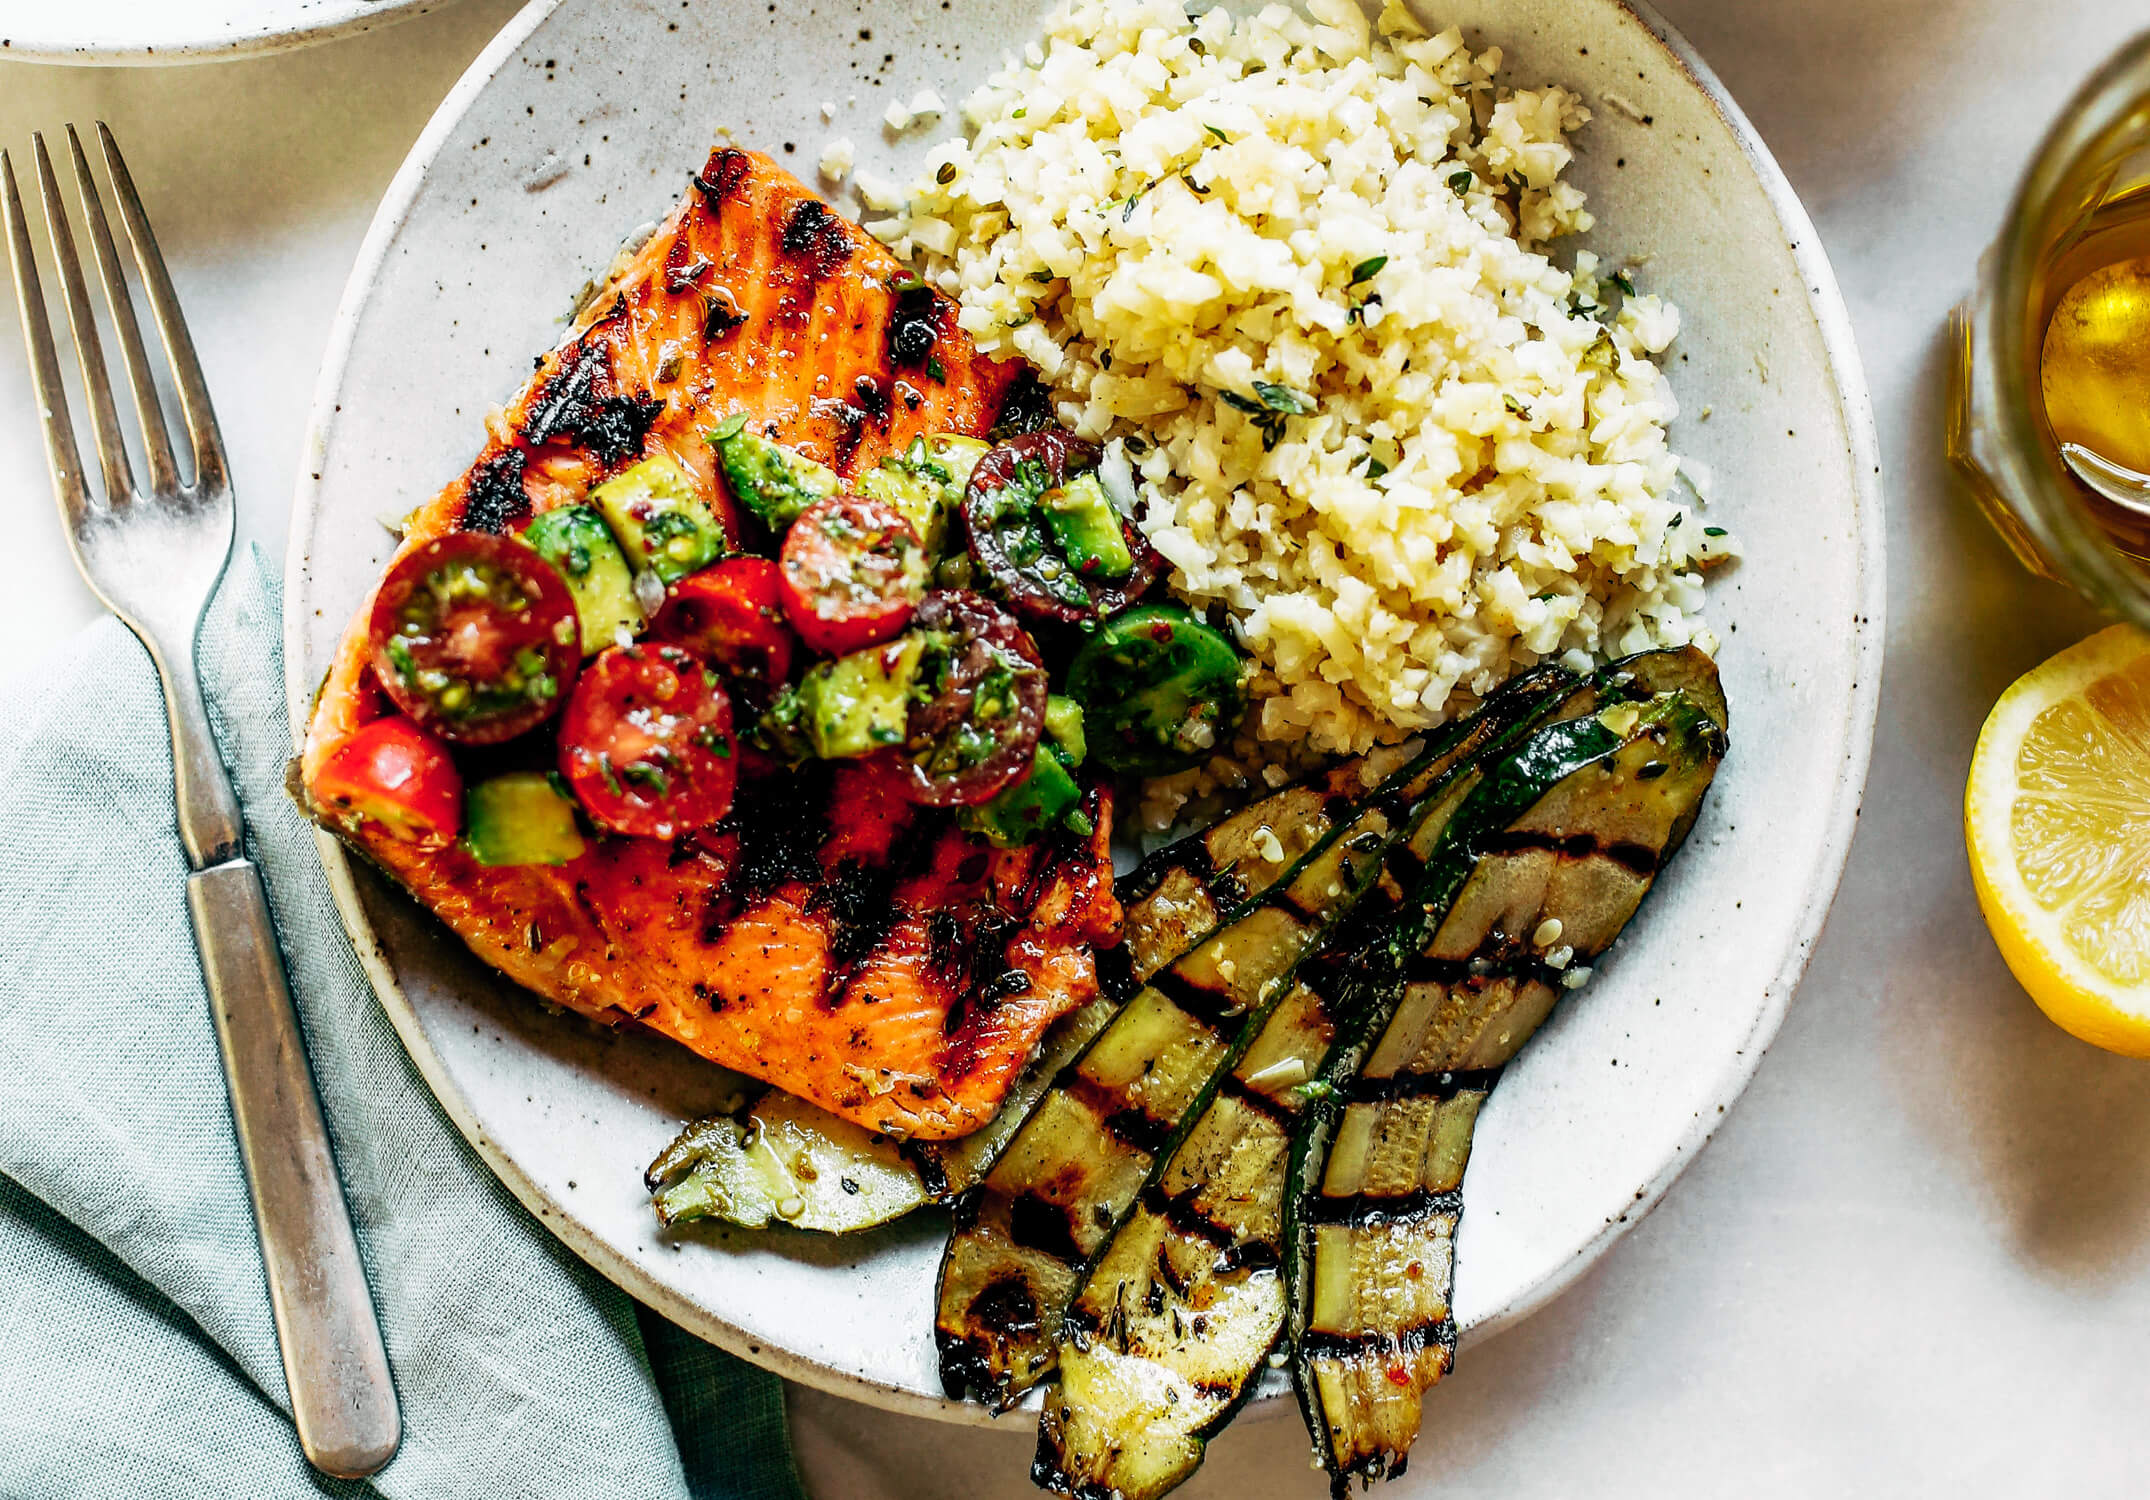 Lemony thyme grilled salmon with cauliflower rice and grilled zucchini. A healthy, light, and fresh whole30 dinner idea! An easy paleo meal for the whole family. Paleo dinner and lunch recipes. Easy paleo diet recipes. Whole30 lunch salad. Whole30 dinner recipes. Whole30 meal prep and sides. Best healthy summer dinner recipes. Grilled salmon recipes.